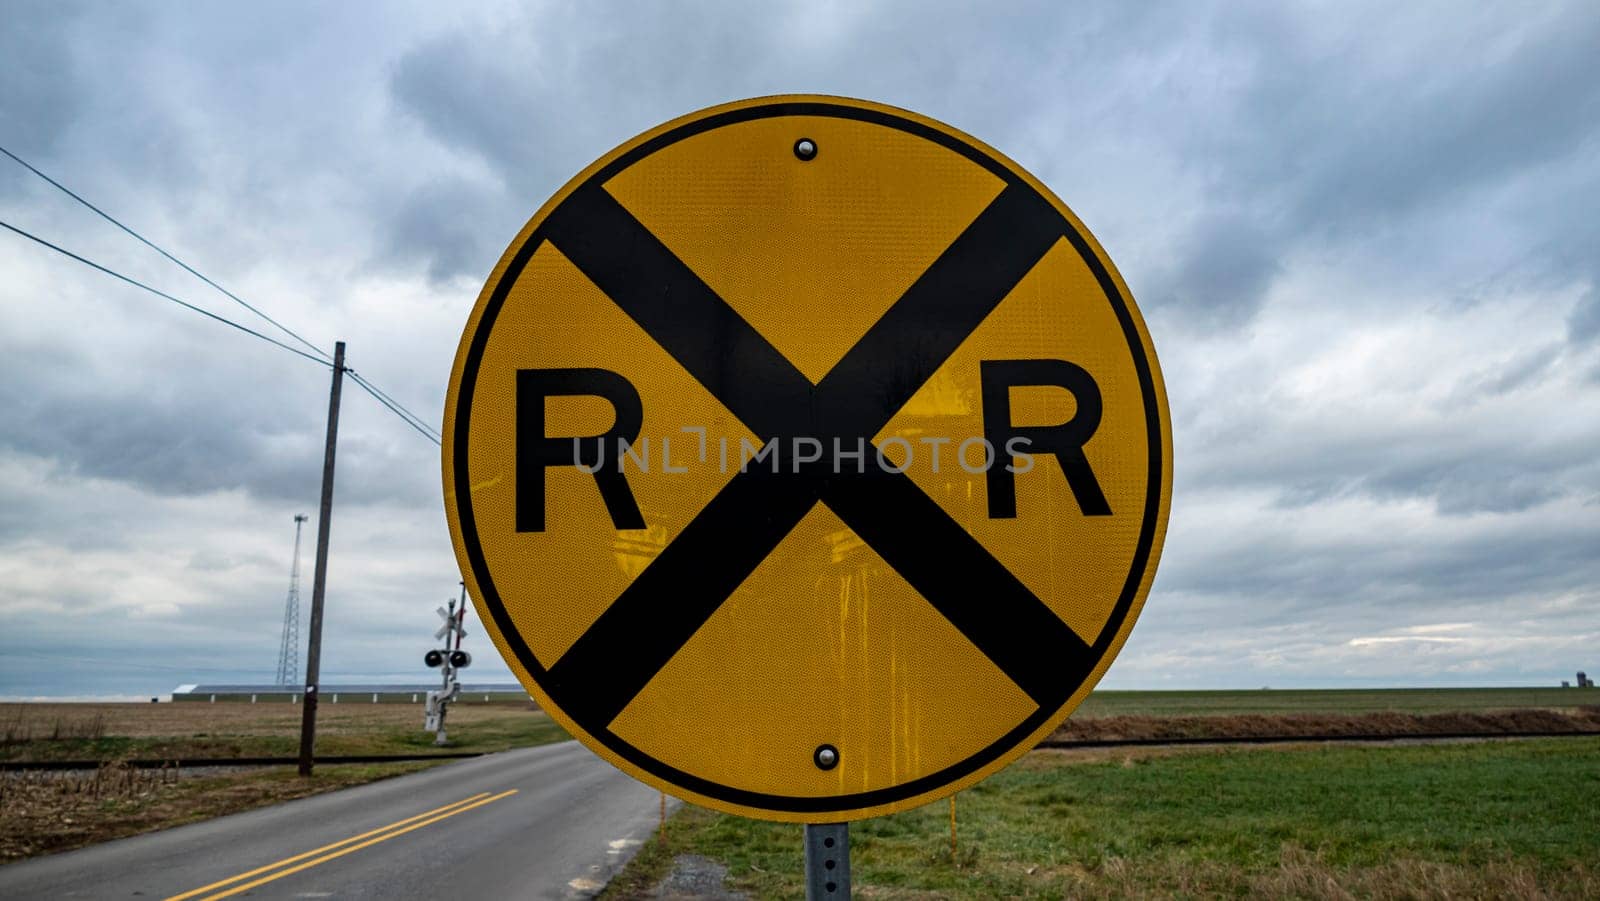 A yellow and black sign with the letters R and X on it. The sign is on a road and is surrounded by a field